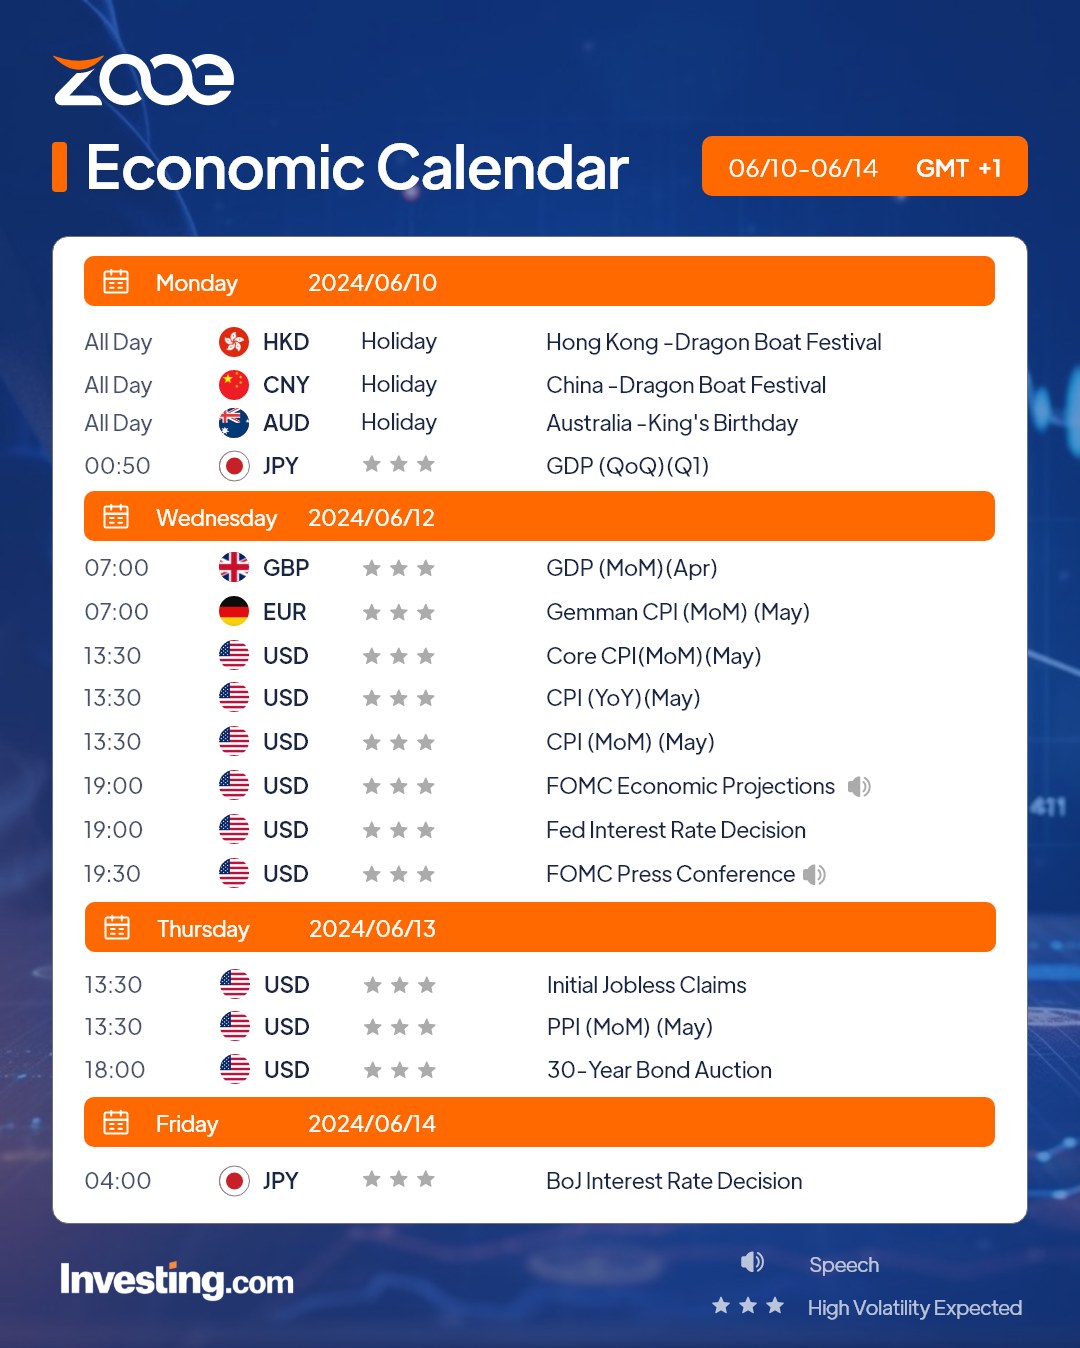 ZOOE’s Economic Calendar: Key Events from June 10 to 14, 2024